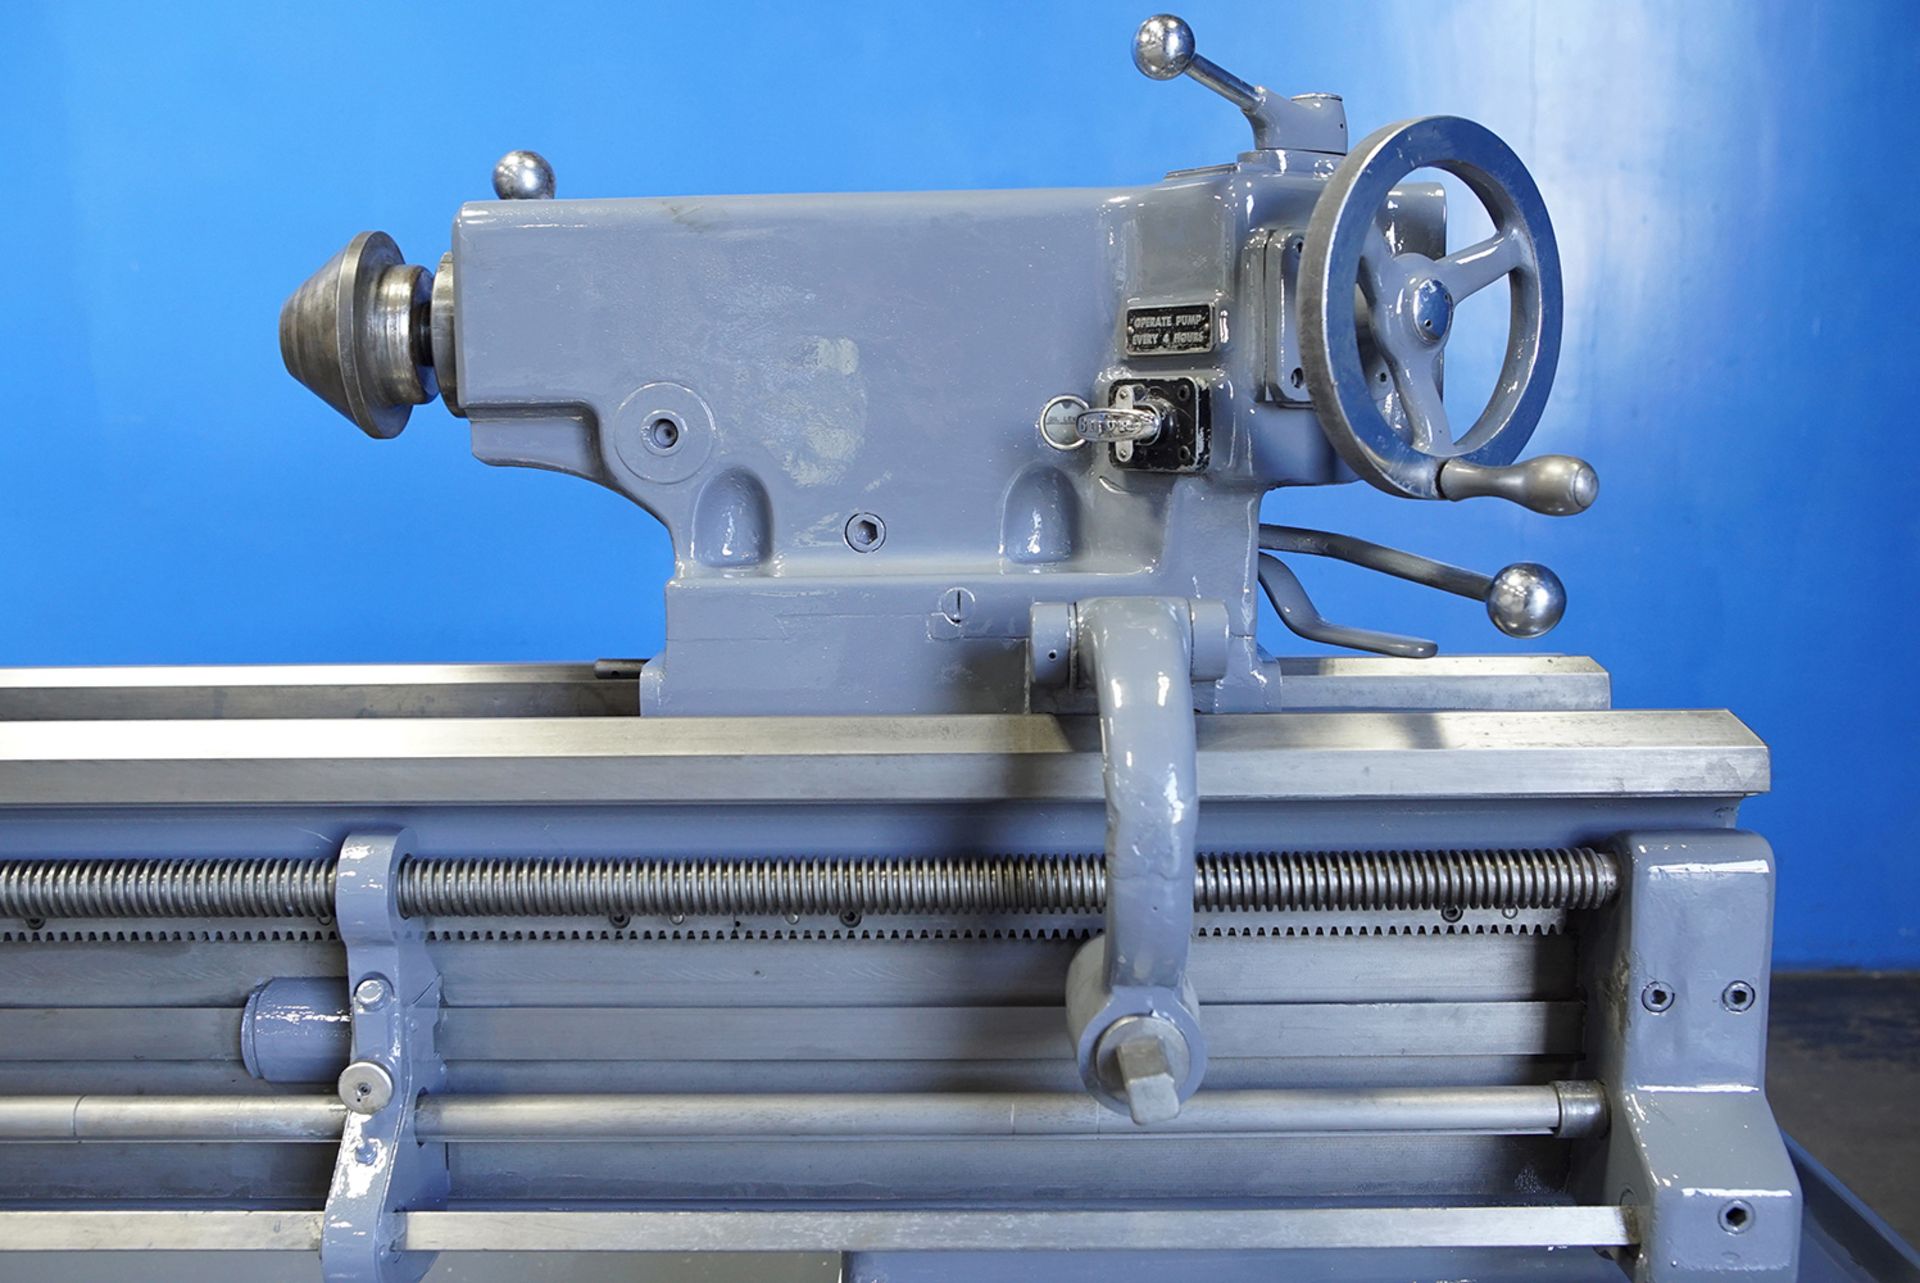 Monarch - Engine Lathe | 16" x 102", Located In Huntington Park, CA - #6430JVHP - Image 9 of 10